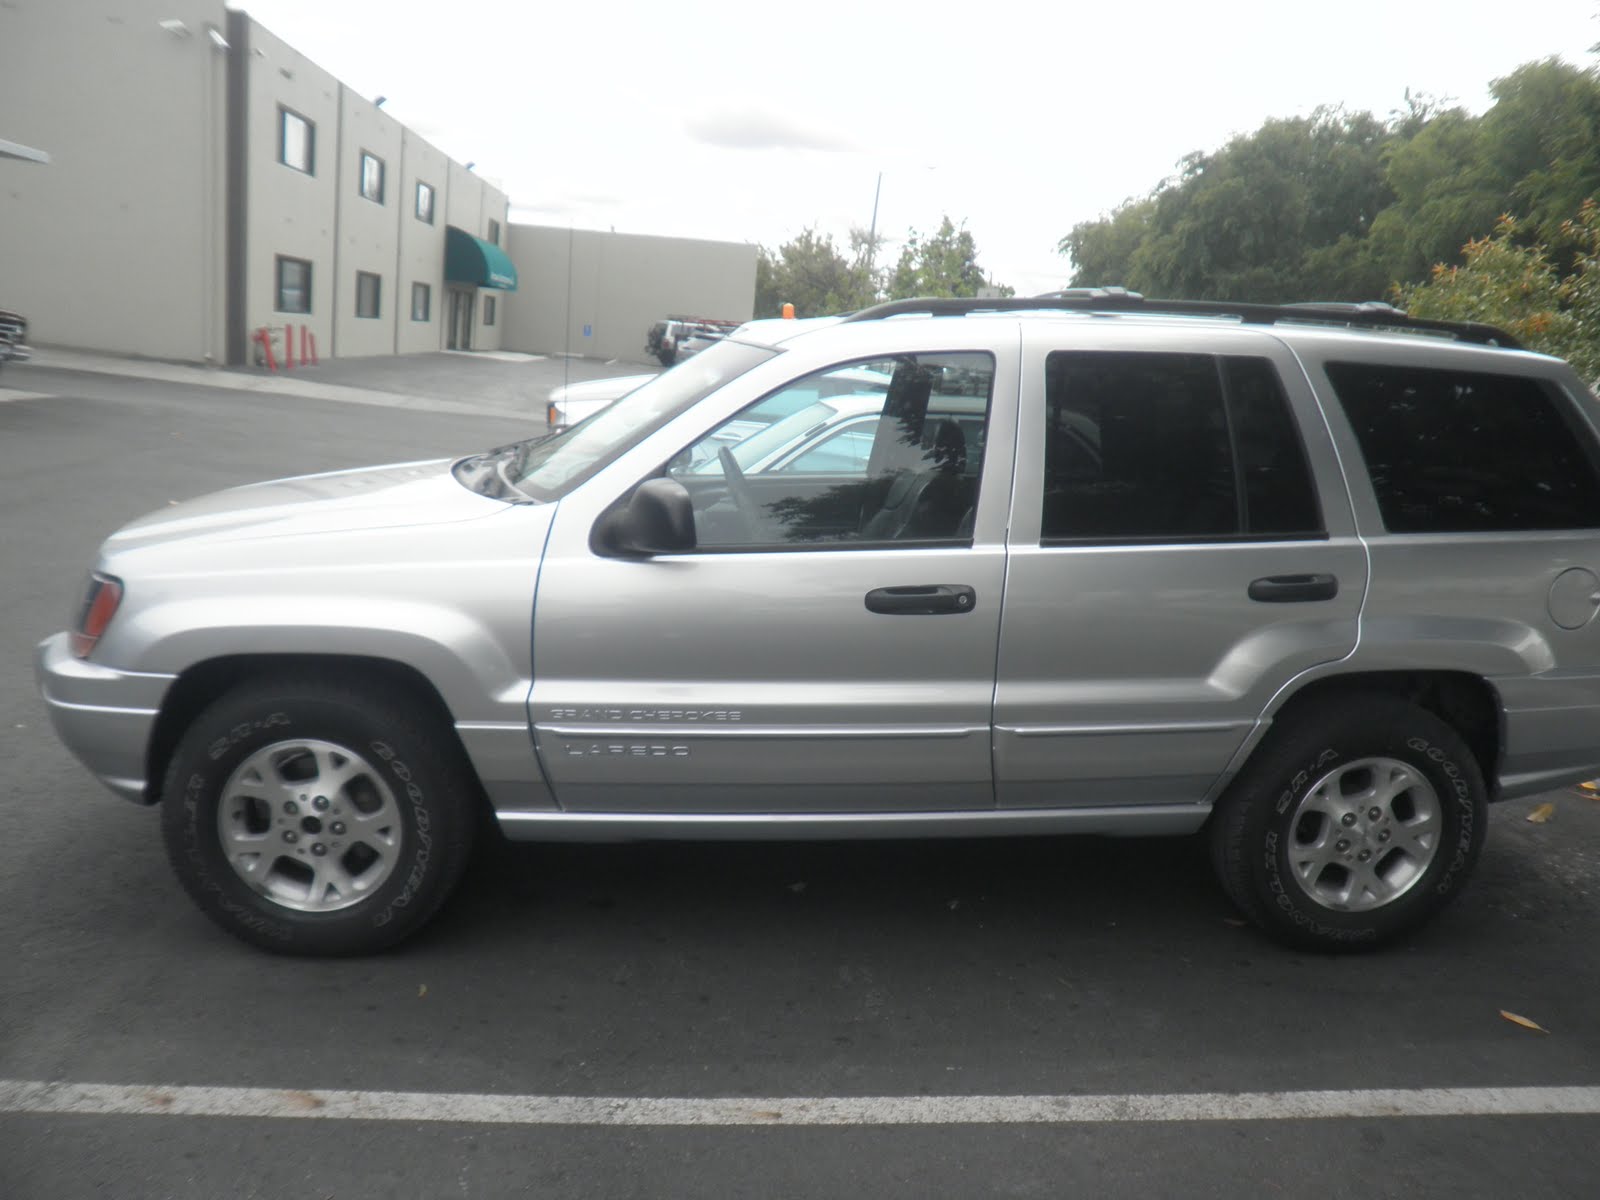 1999 Jeep grand cherokee factory colors #2